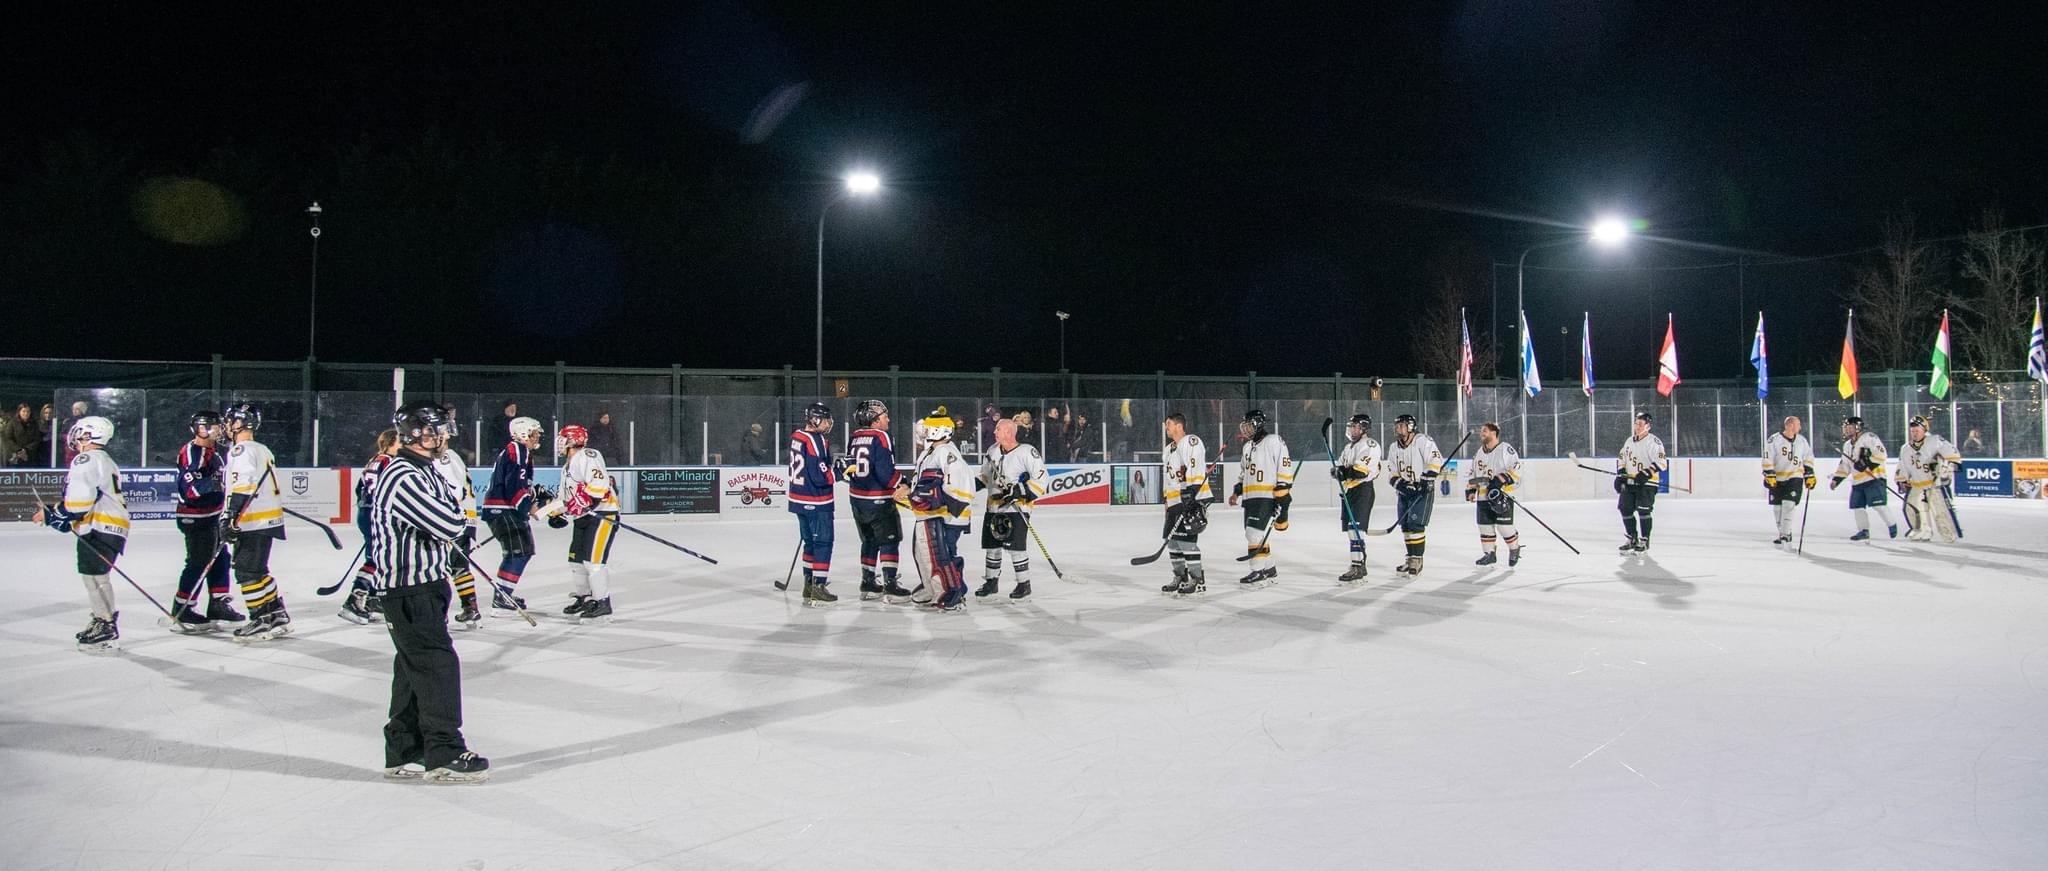 The District 9 First Responders hockey team, made up of firefighters, police officers, EMTs and ocean rescue members from East Hampton, Sag Harbor and Southampton, hosted the Suffolk County Sheriffs at Buckskill Winter Club in East Hampton on Sunday night.  PHOTOS COURTESY SUSAN KETCHAM/SCSO HOCKEY